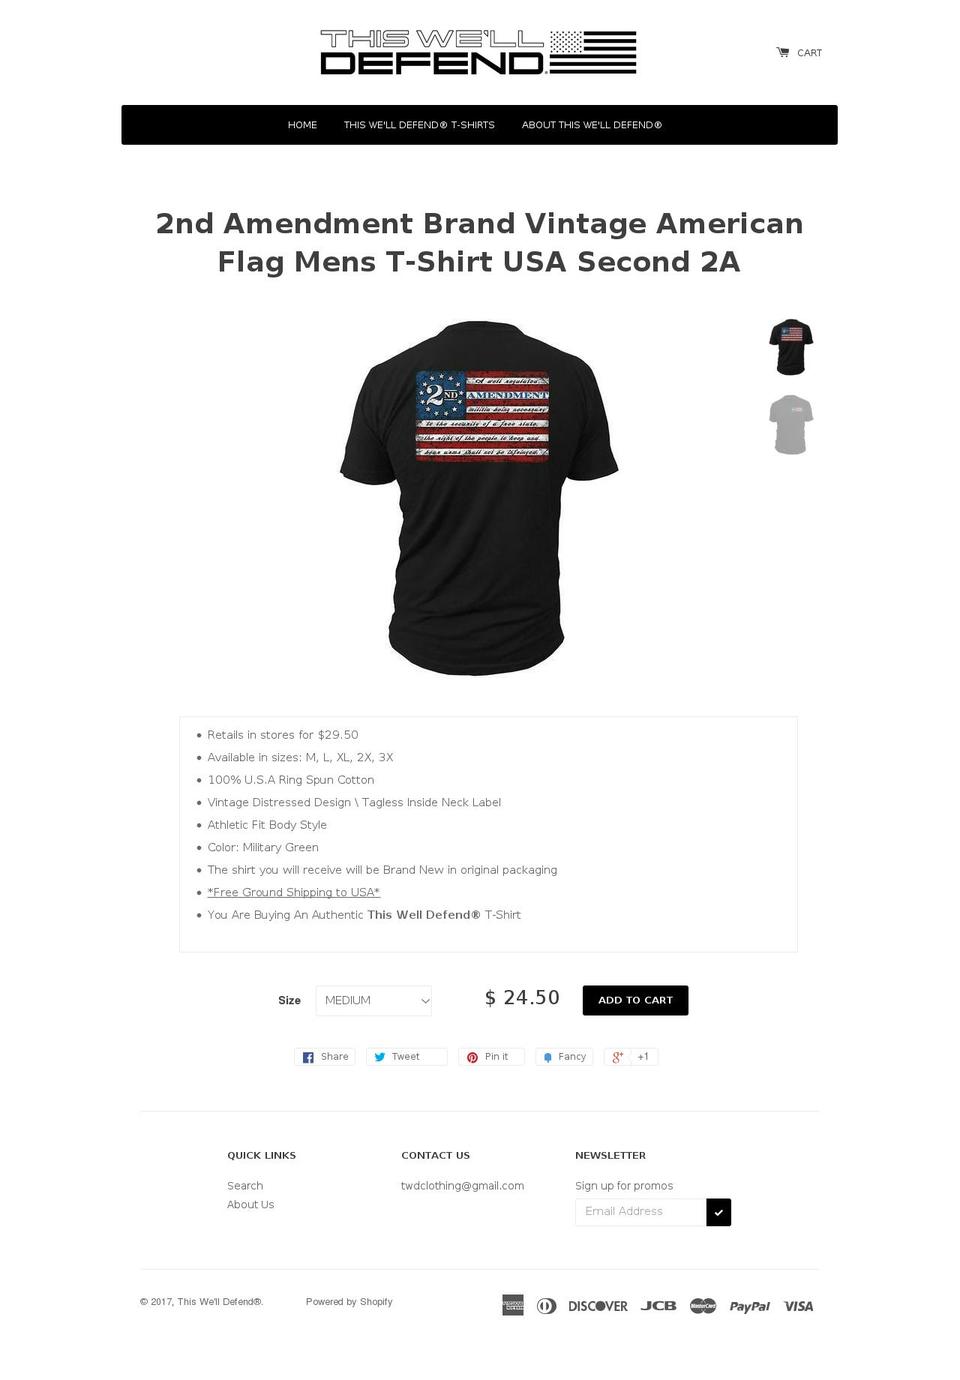 thiswelldefend.com shopify website screenshot